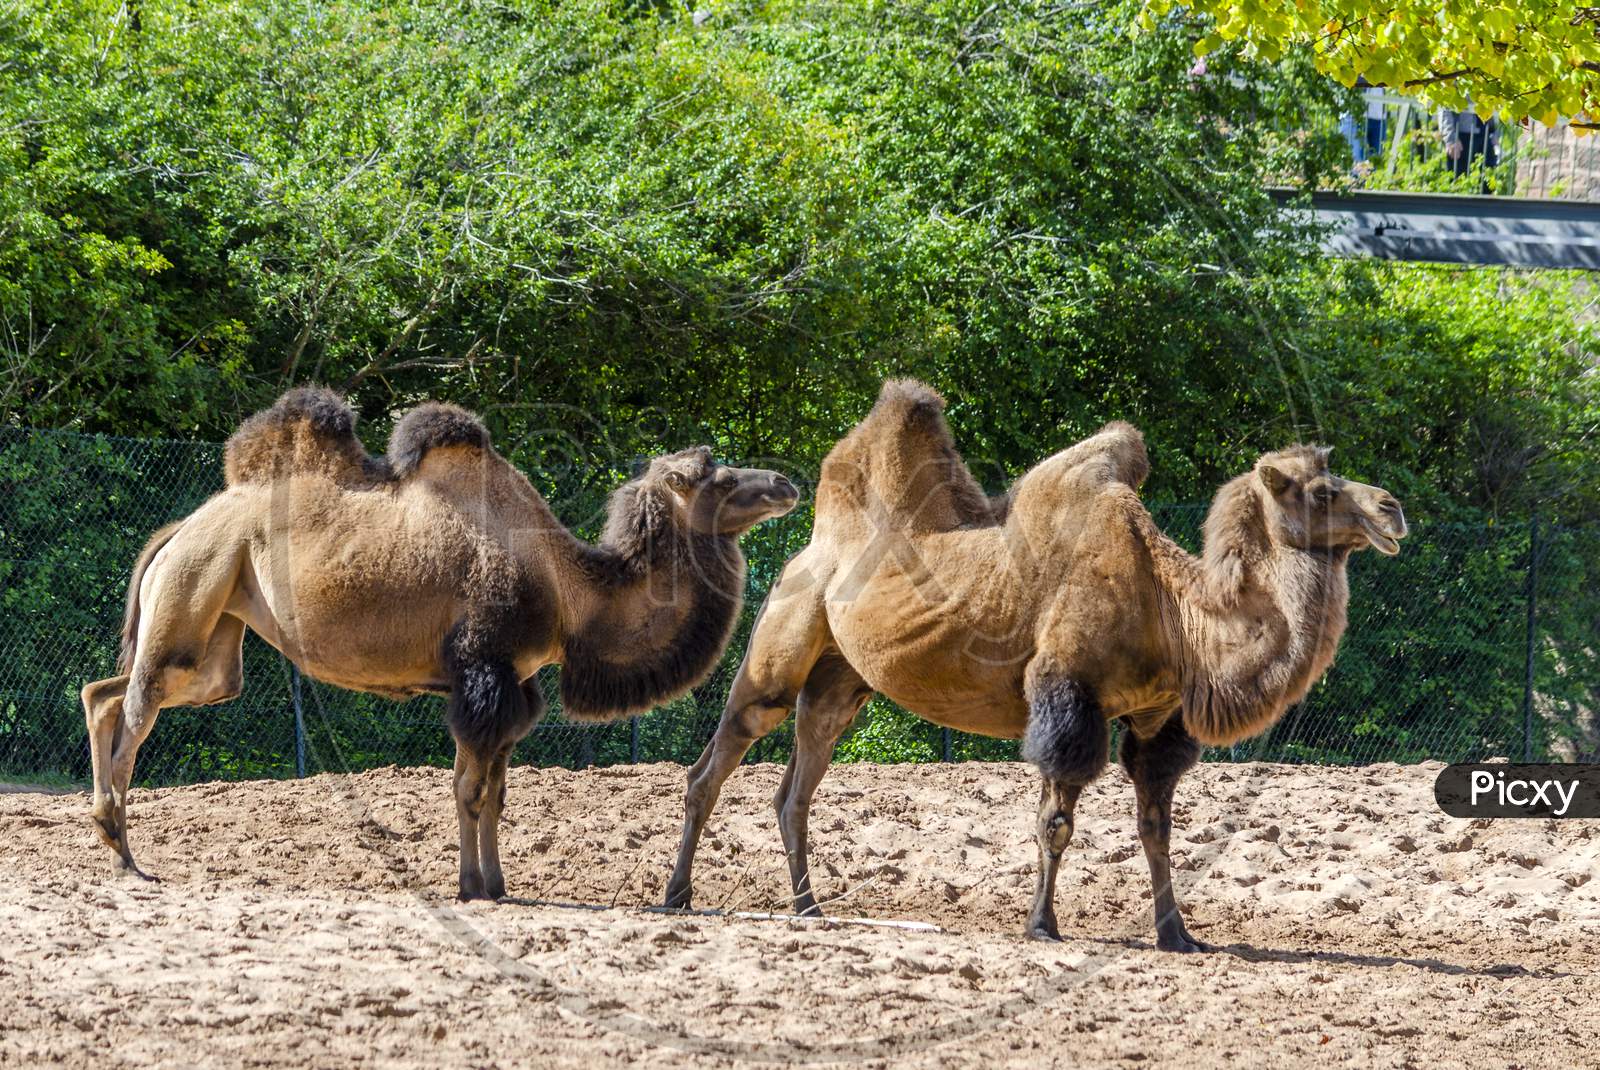 The Bactrian camel is a large, even-toed ungulate native to the steppes of Central Asia.